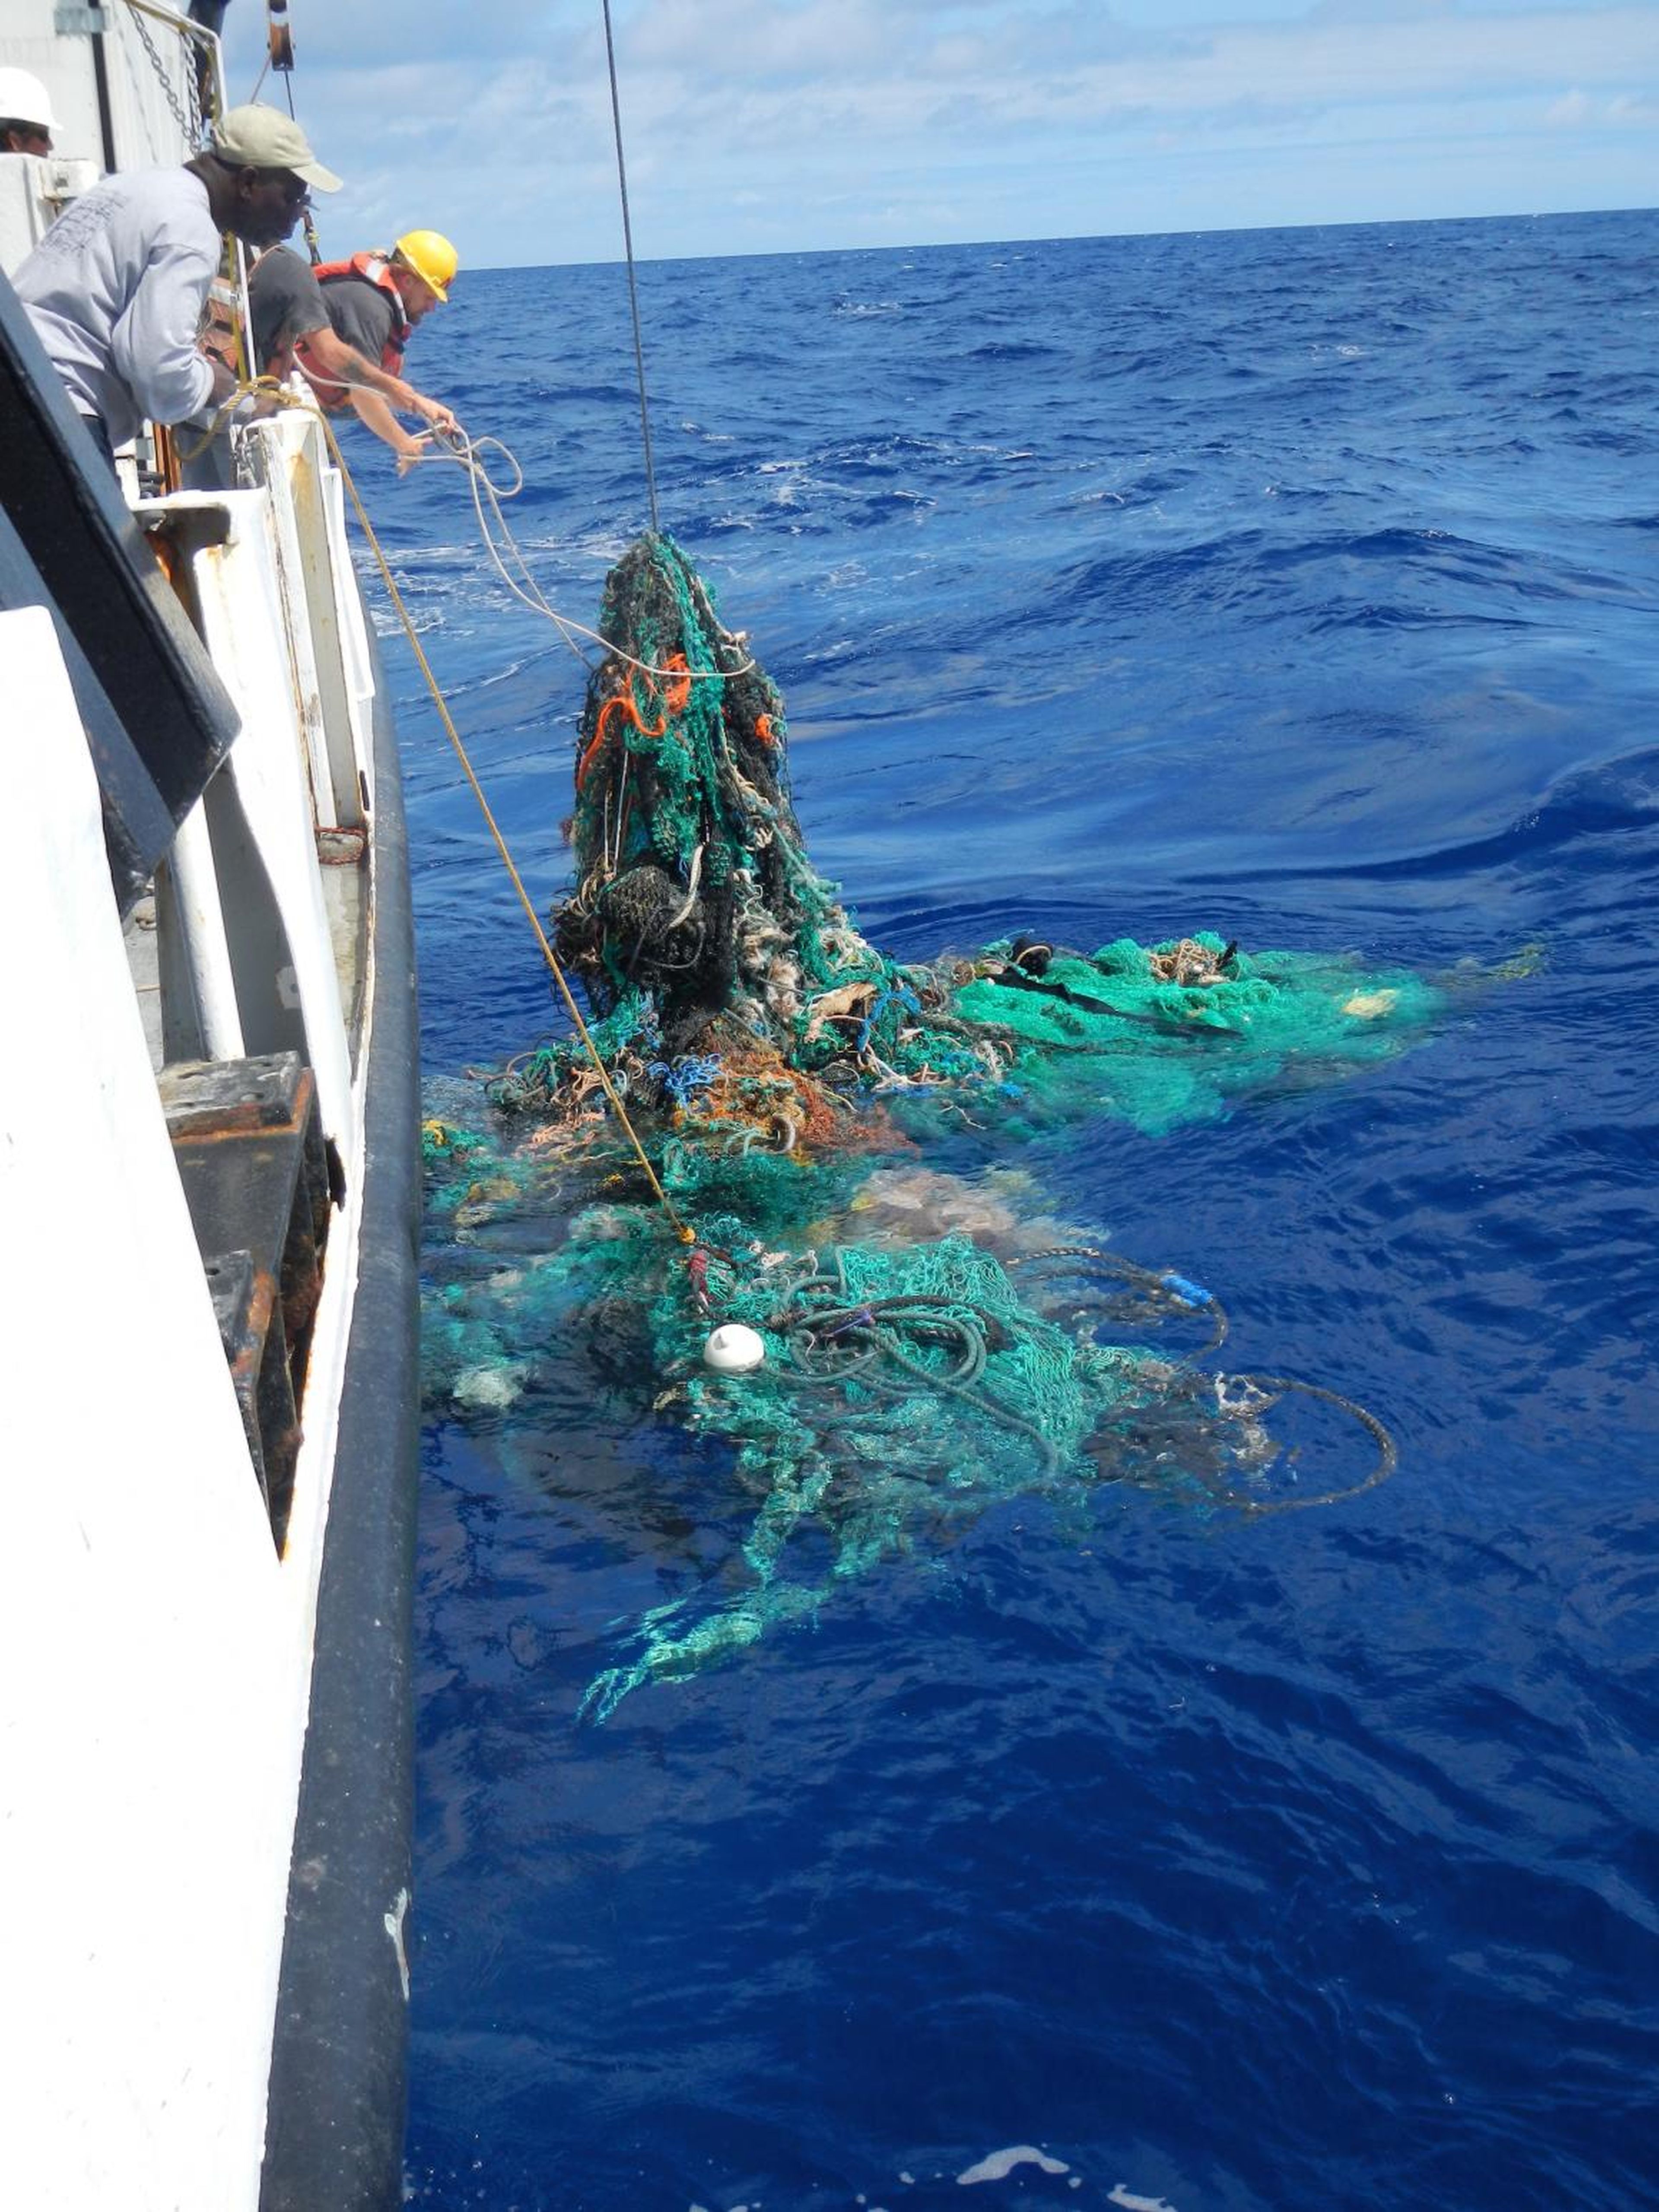 They also estimated that 46% of the plastic mass was from lost fishing nets known as "ghost nets." These nets drift through the sea, ensnaring creatures and breaking into smaller bits of plastic.